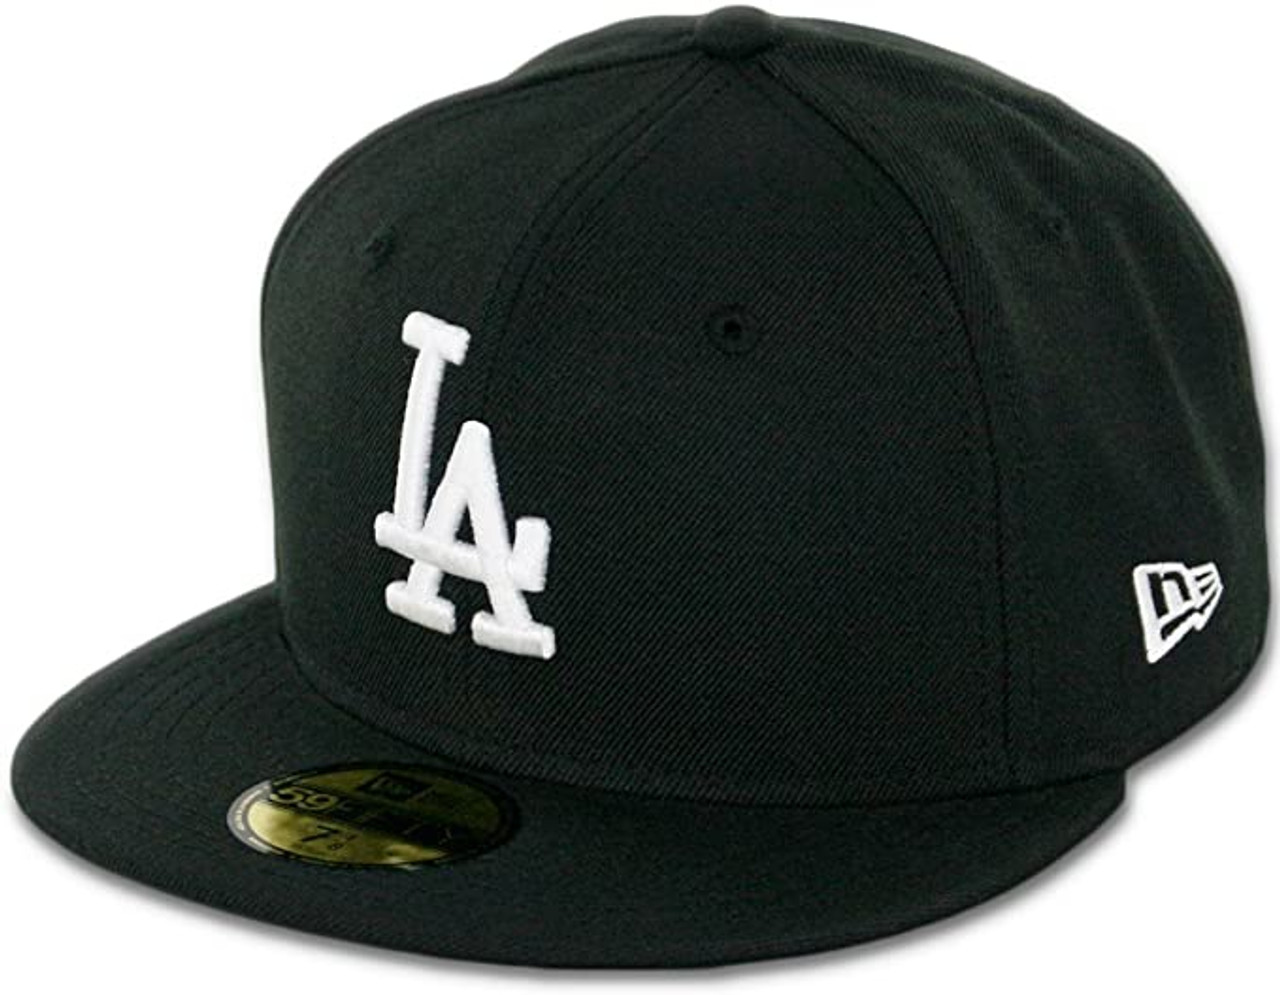 BRAND NEW New Era 59Fifty LA Dodgers Fitted Hat Cap Size 7 1/4